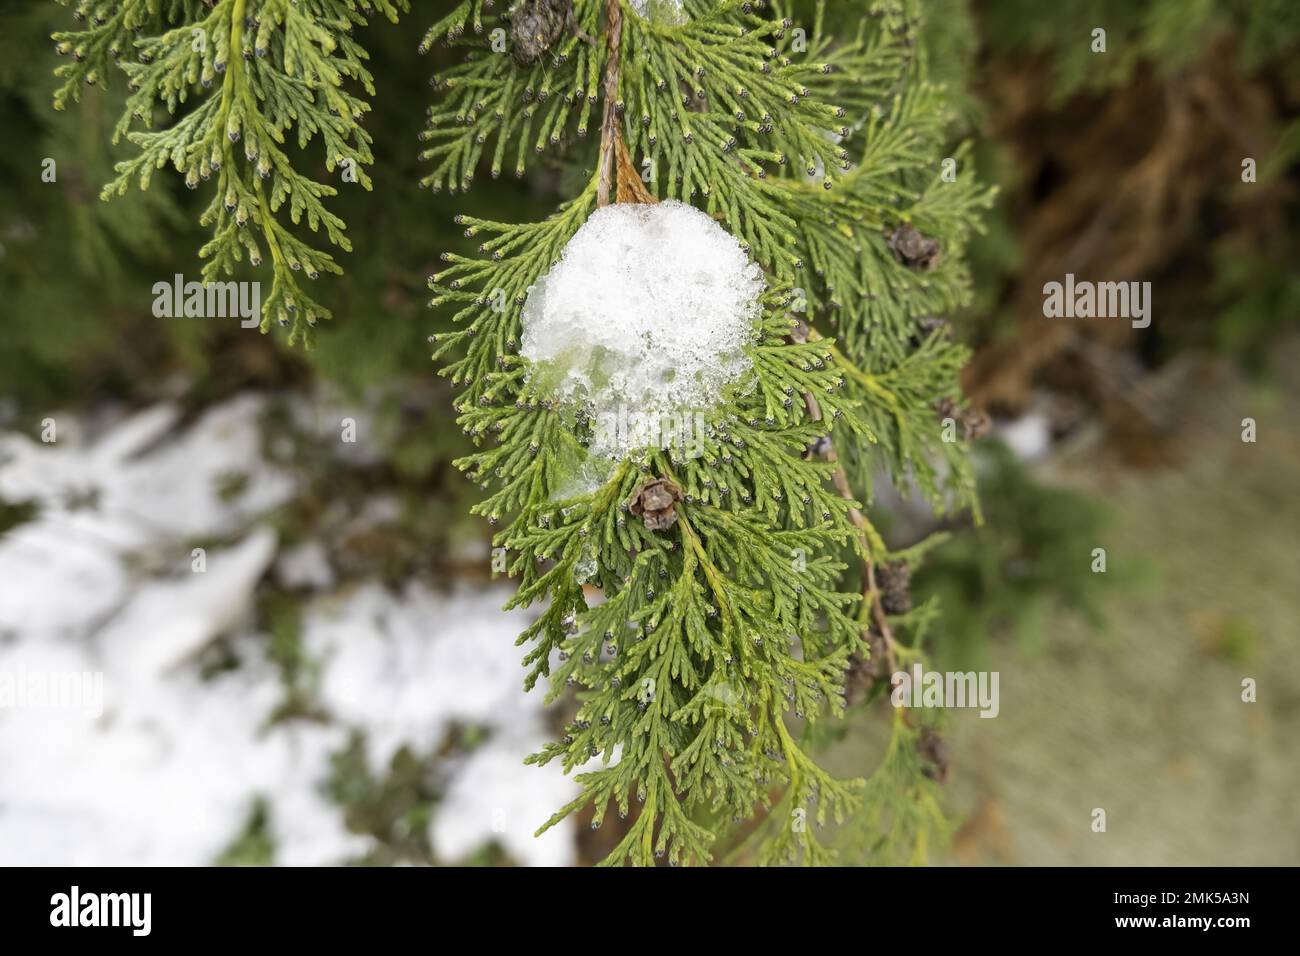 Pine leaves with snow, nature and trees, winter Stock Photo